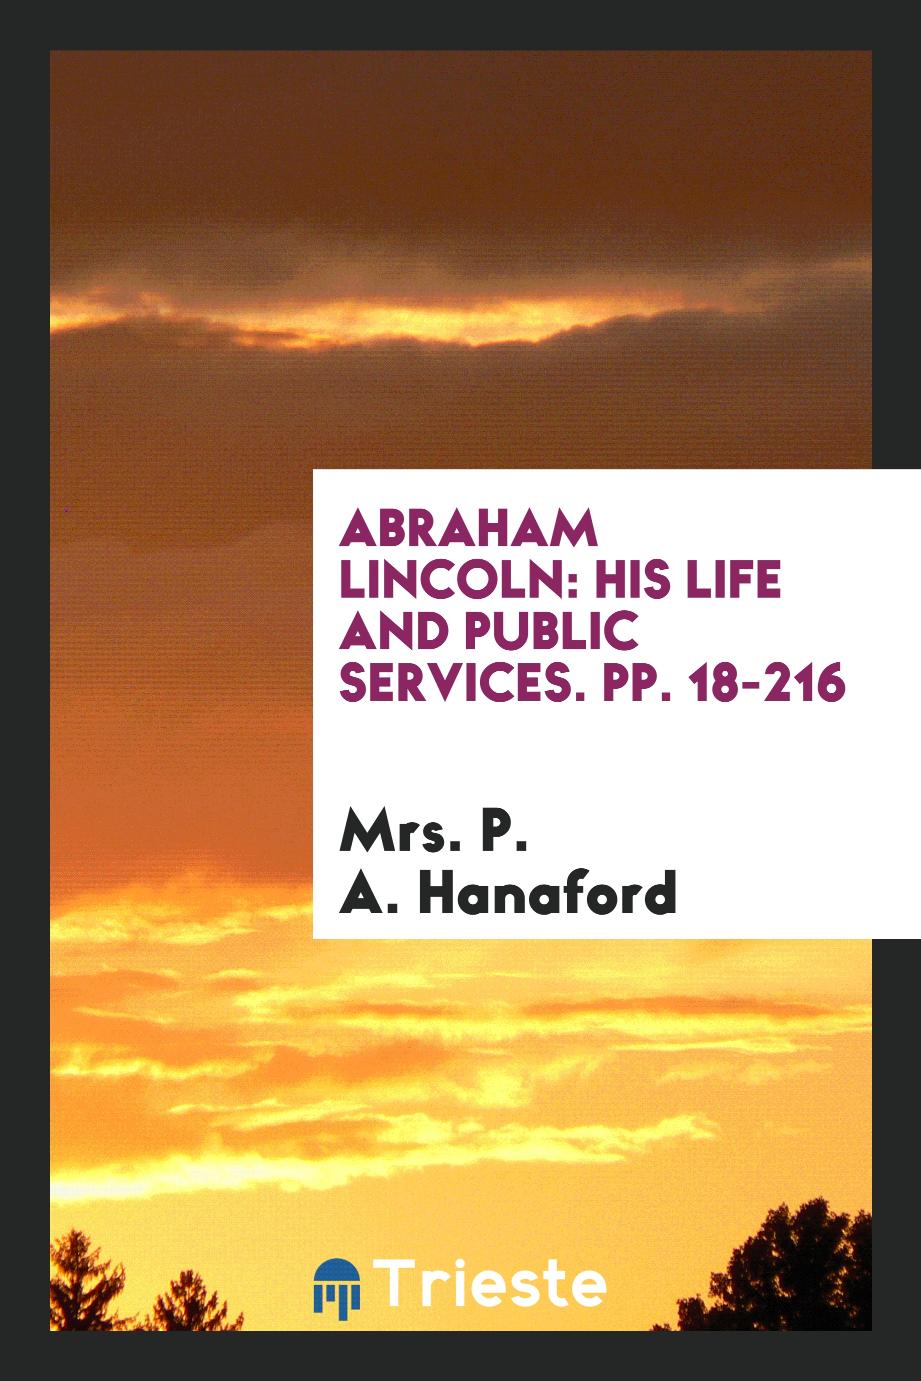 Abraham Lincoln: His Life and Public Services. pp. 18-216